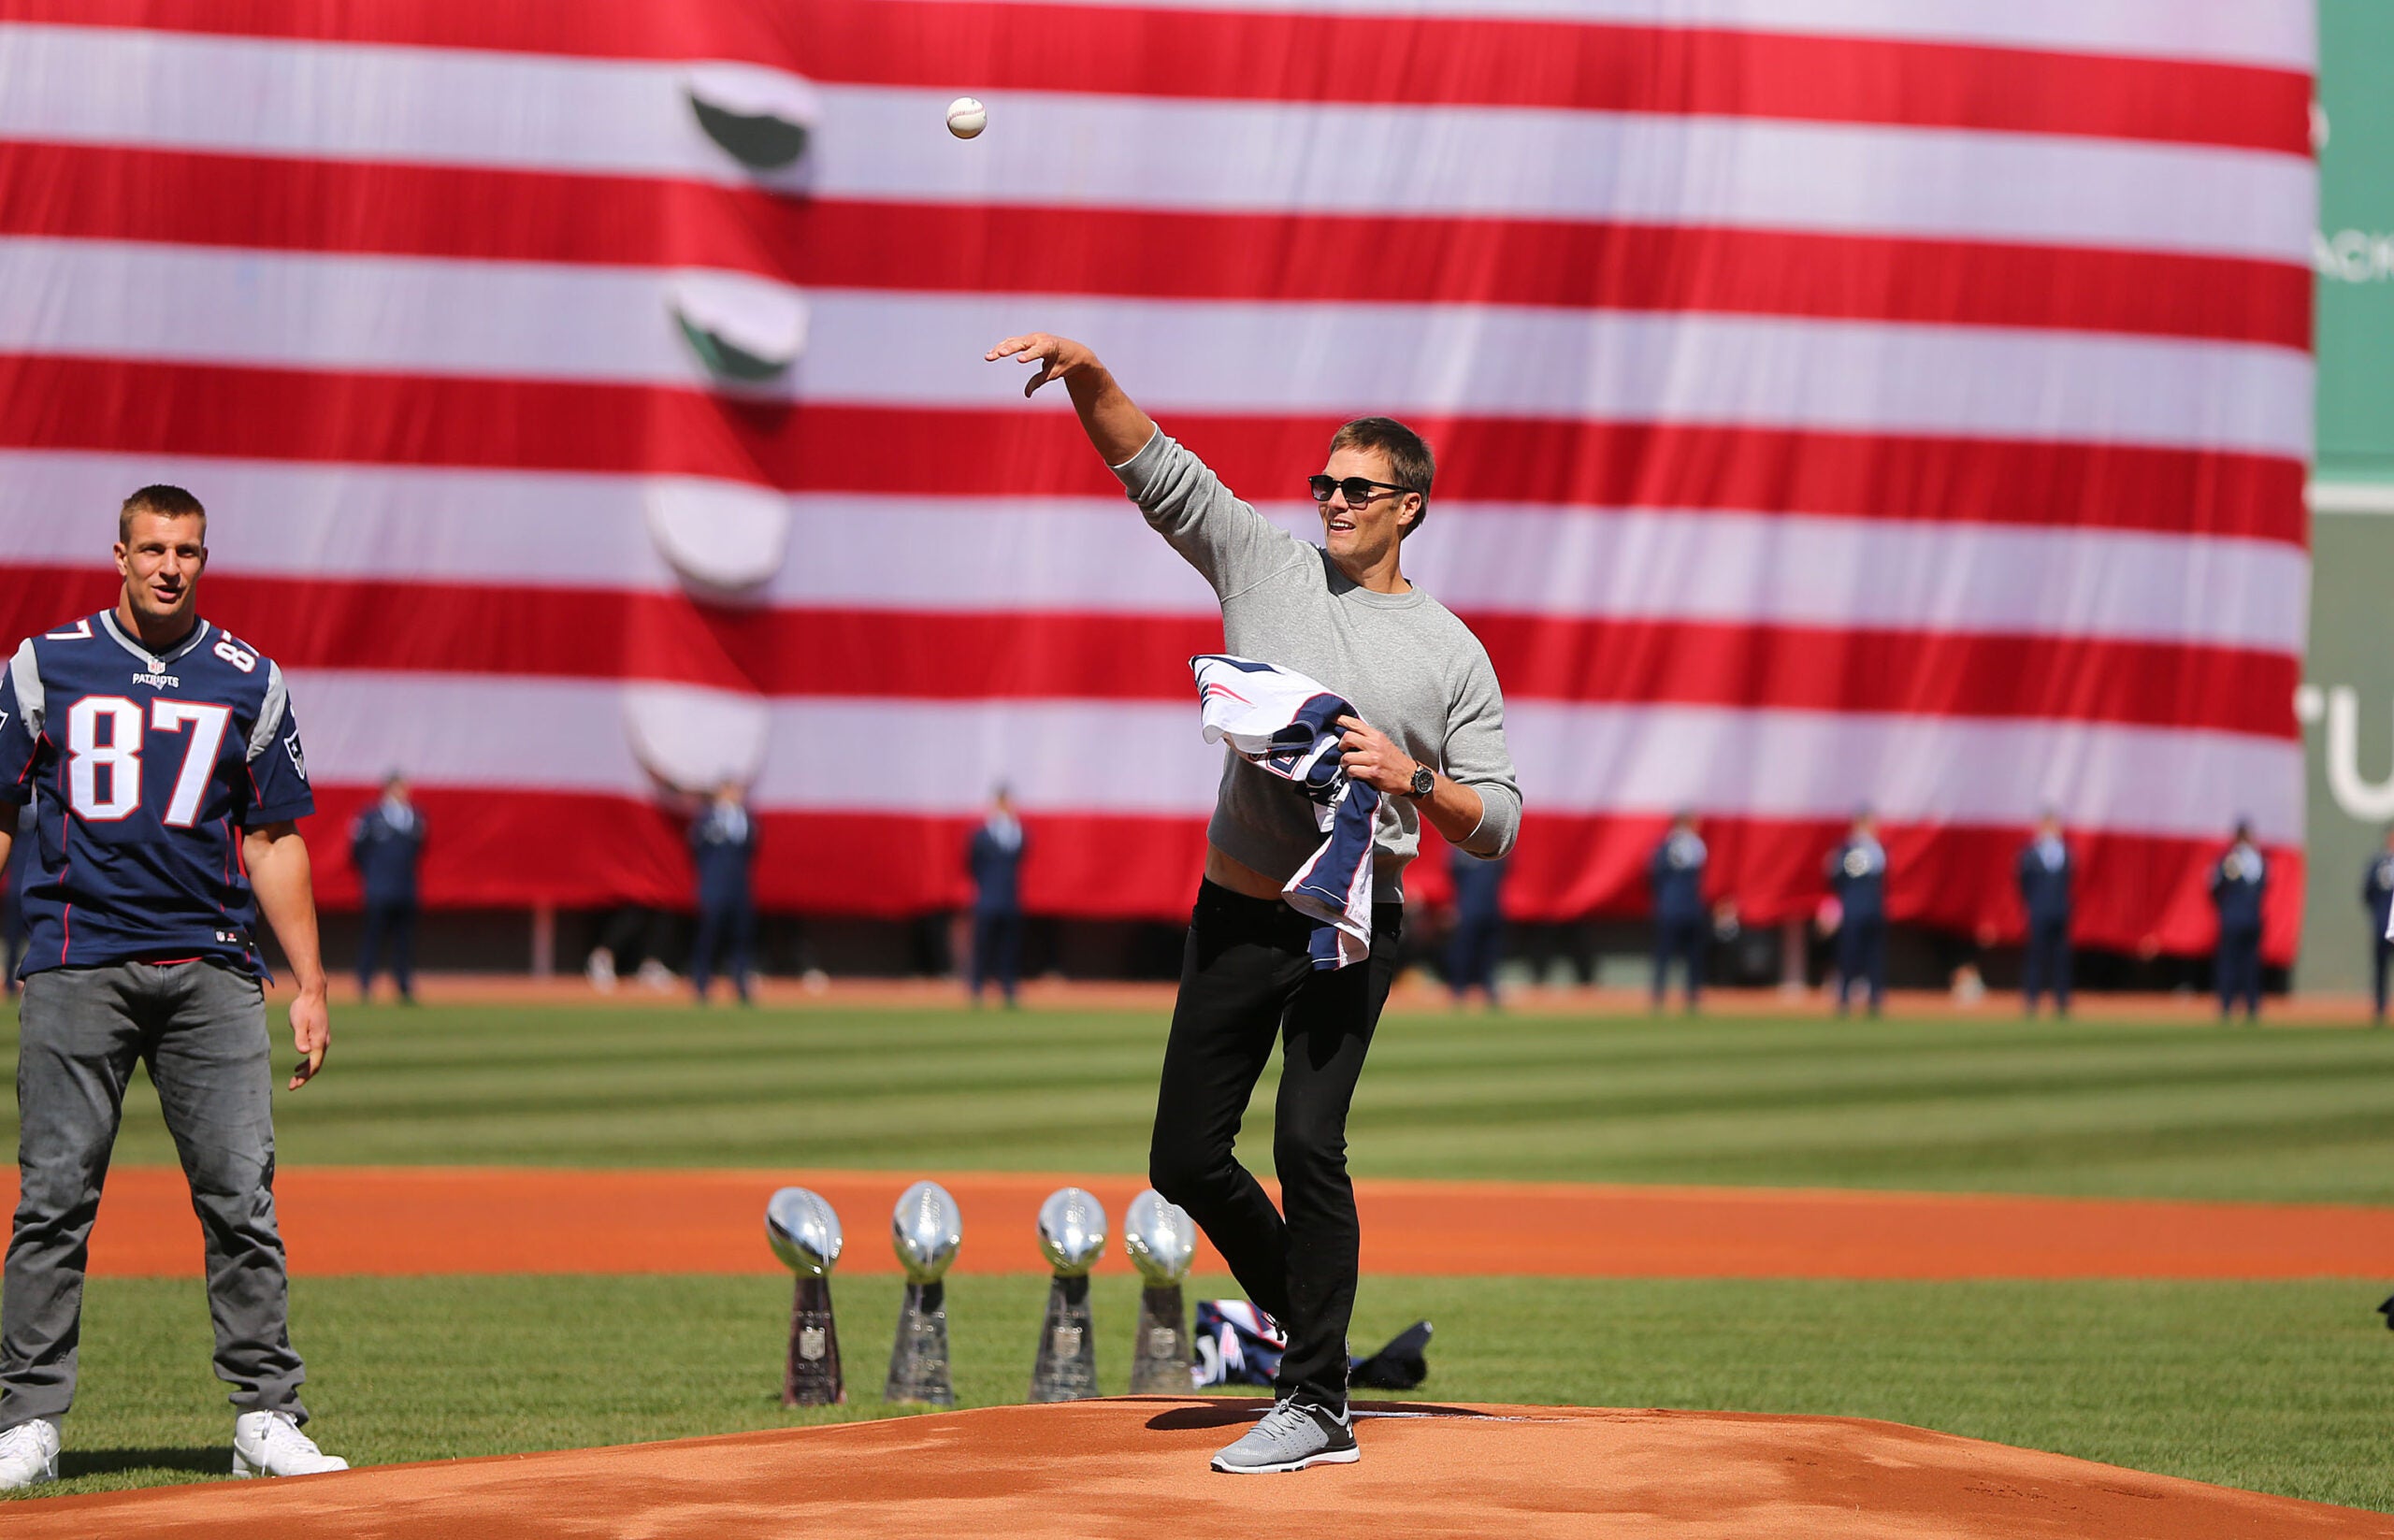 Tom Brady marked MLB Opening Day with an April Fool's Day joke